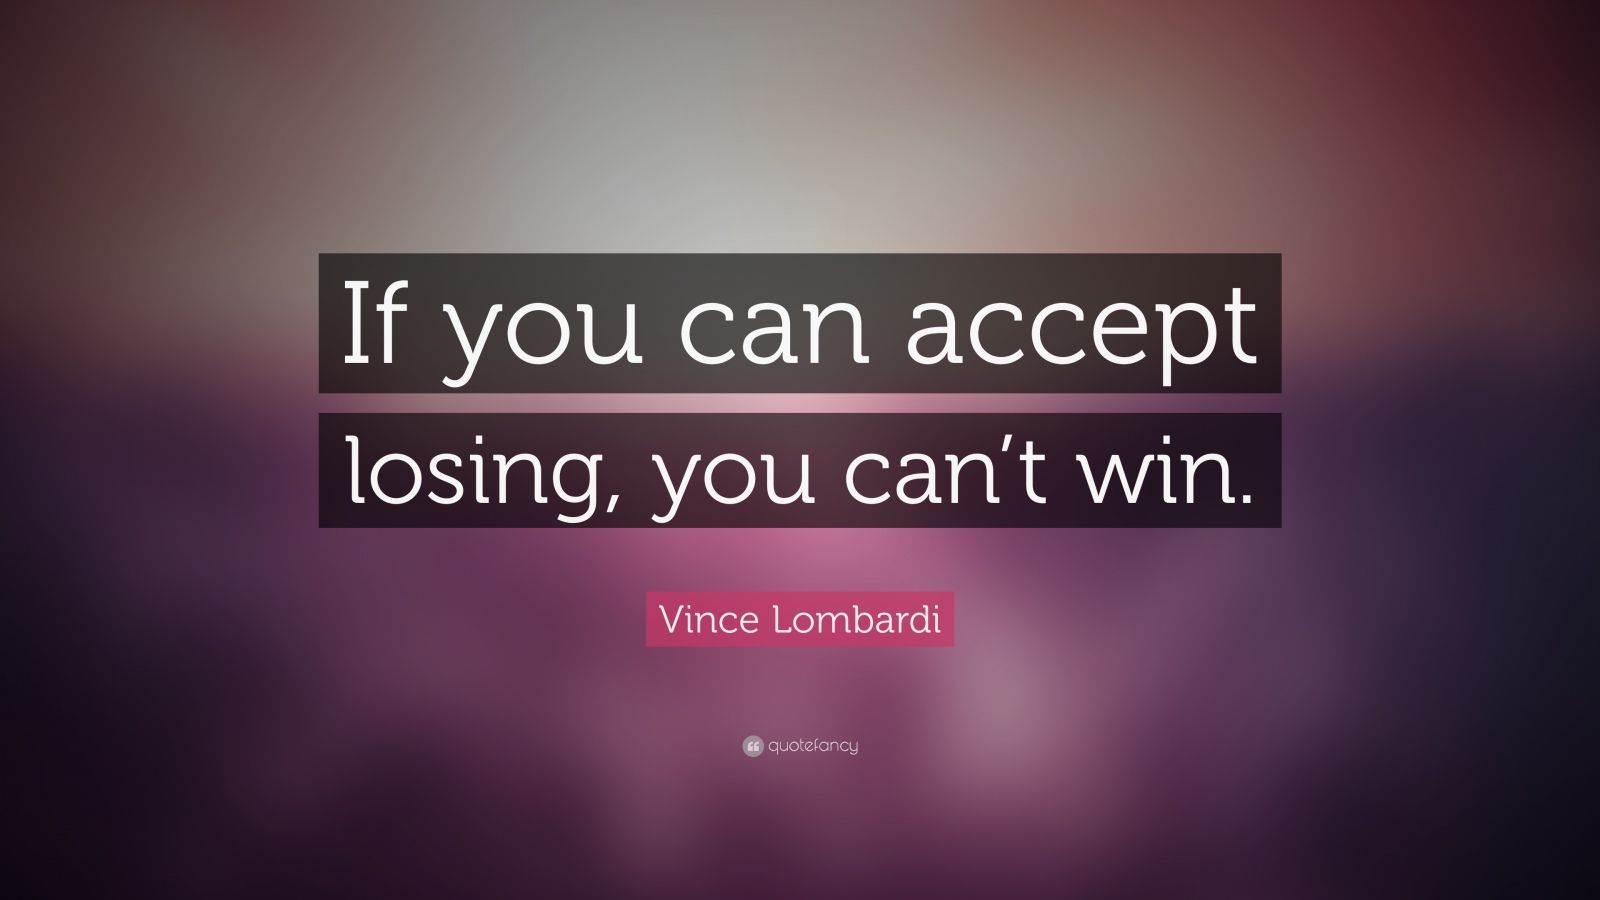 8197 Vince Lombardi Quote If you can accept losing you can t win